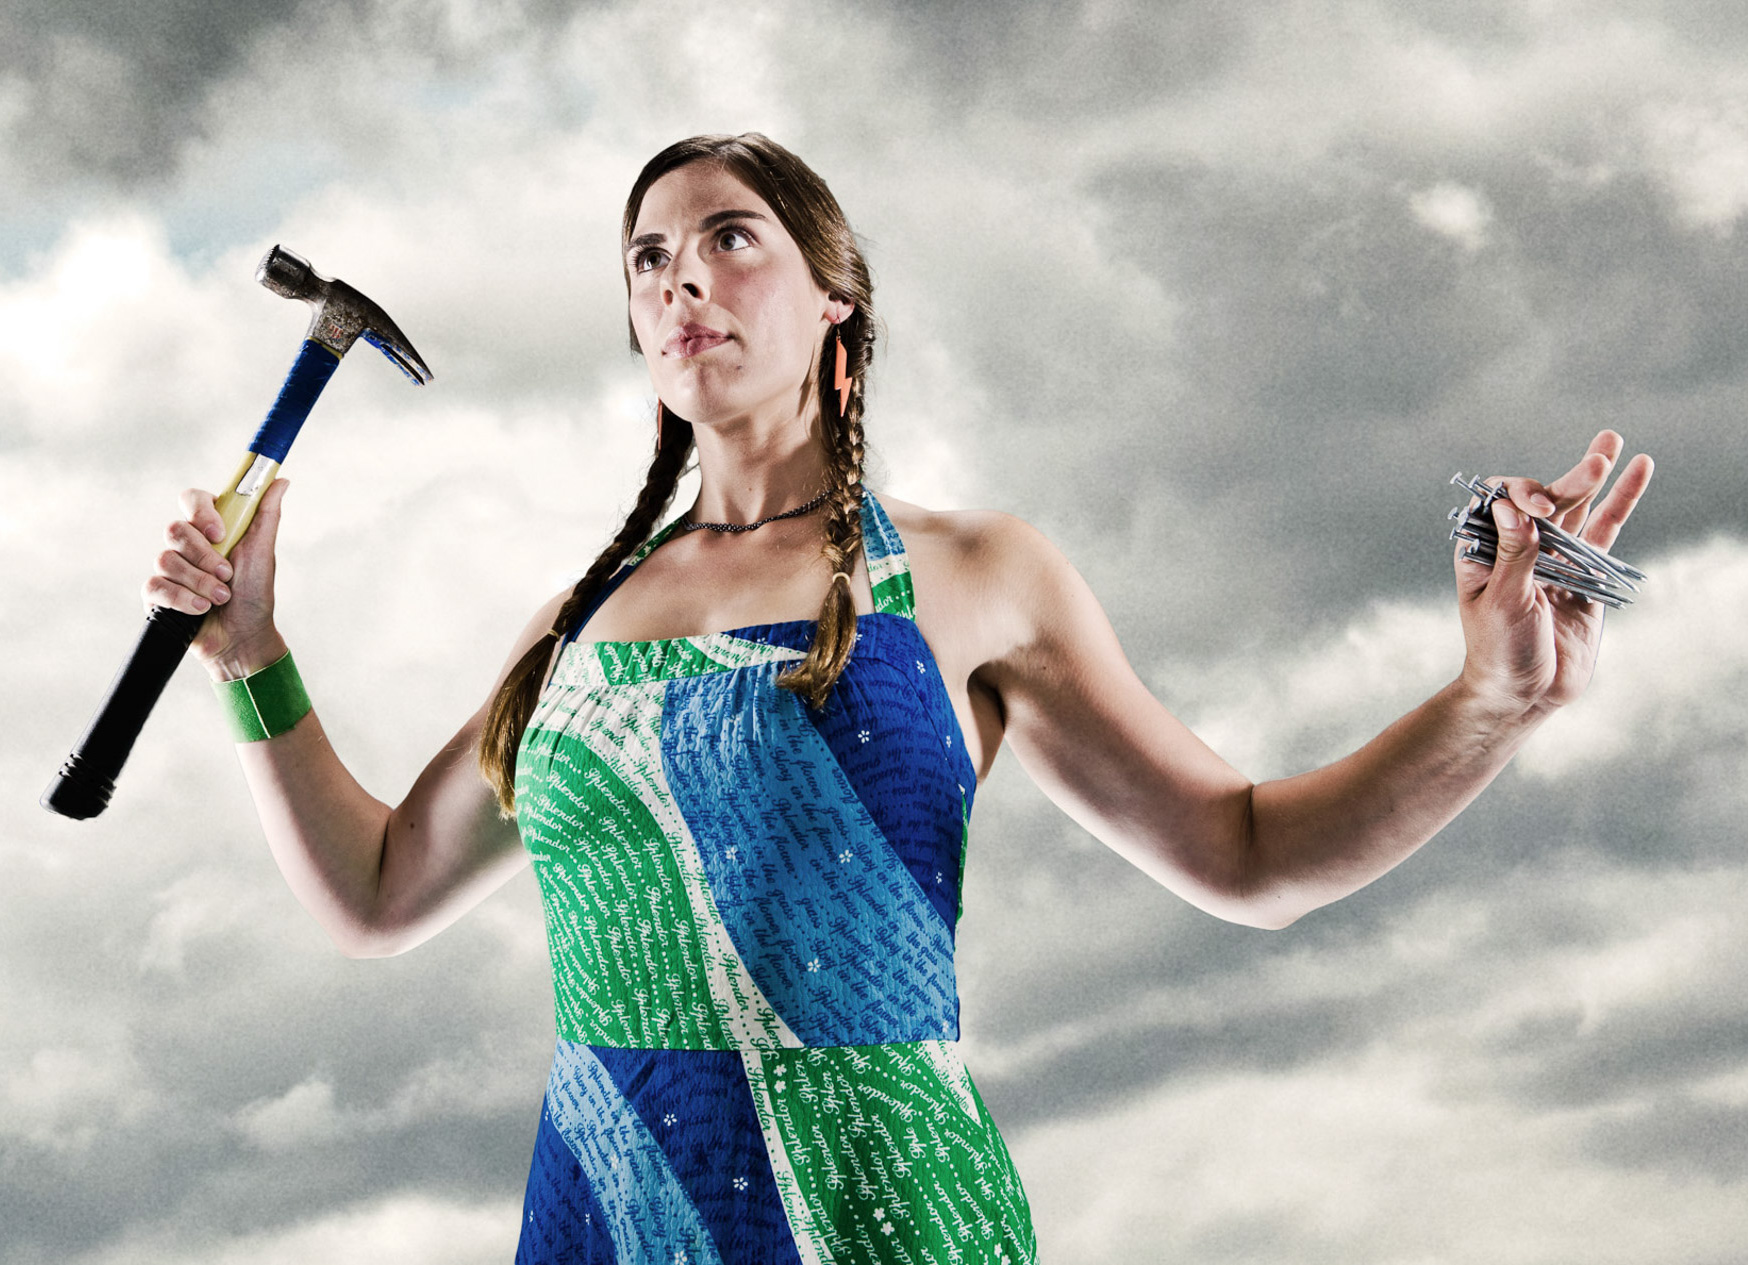 Woman holding hammer and nails. Propaganda poster art for Habitat for Humanity, featuring Audrey Rose Goldfarb. Photo by Andy Batt